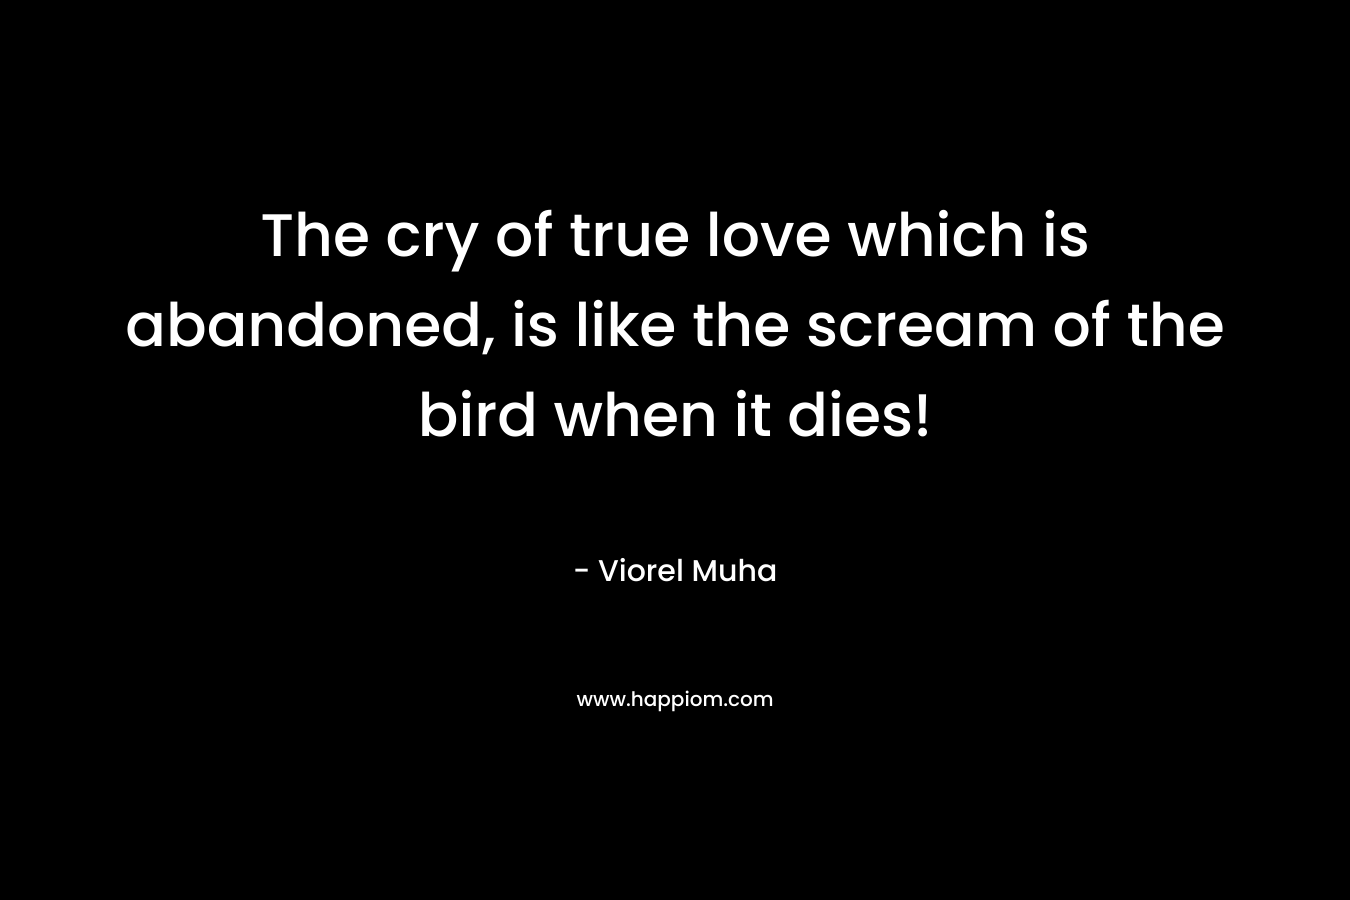 The cry of true love which is abandoned, is like the scream of the bird when it dies! – Viorel Muha